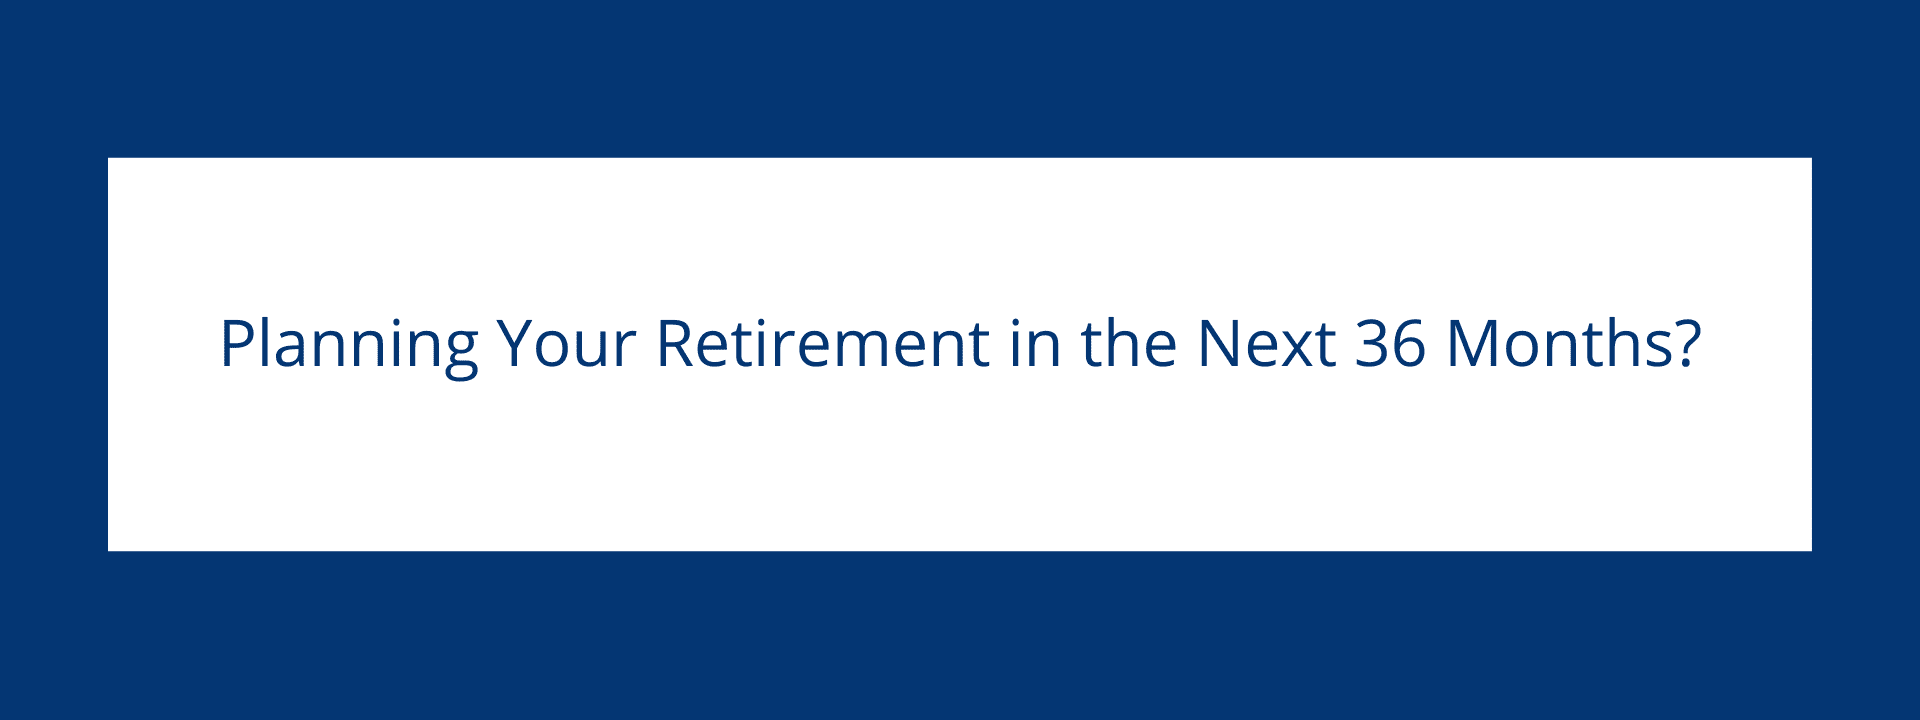 Planning your Retirement in the next 36 months